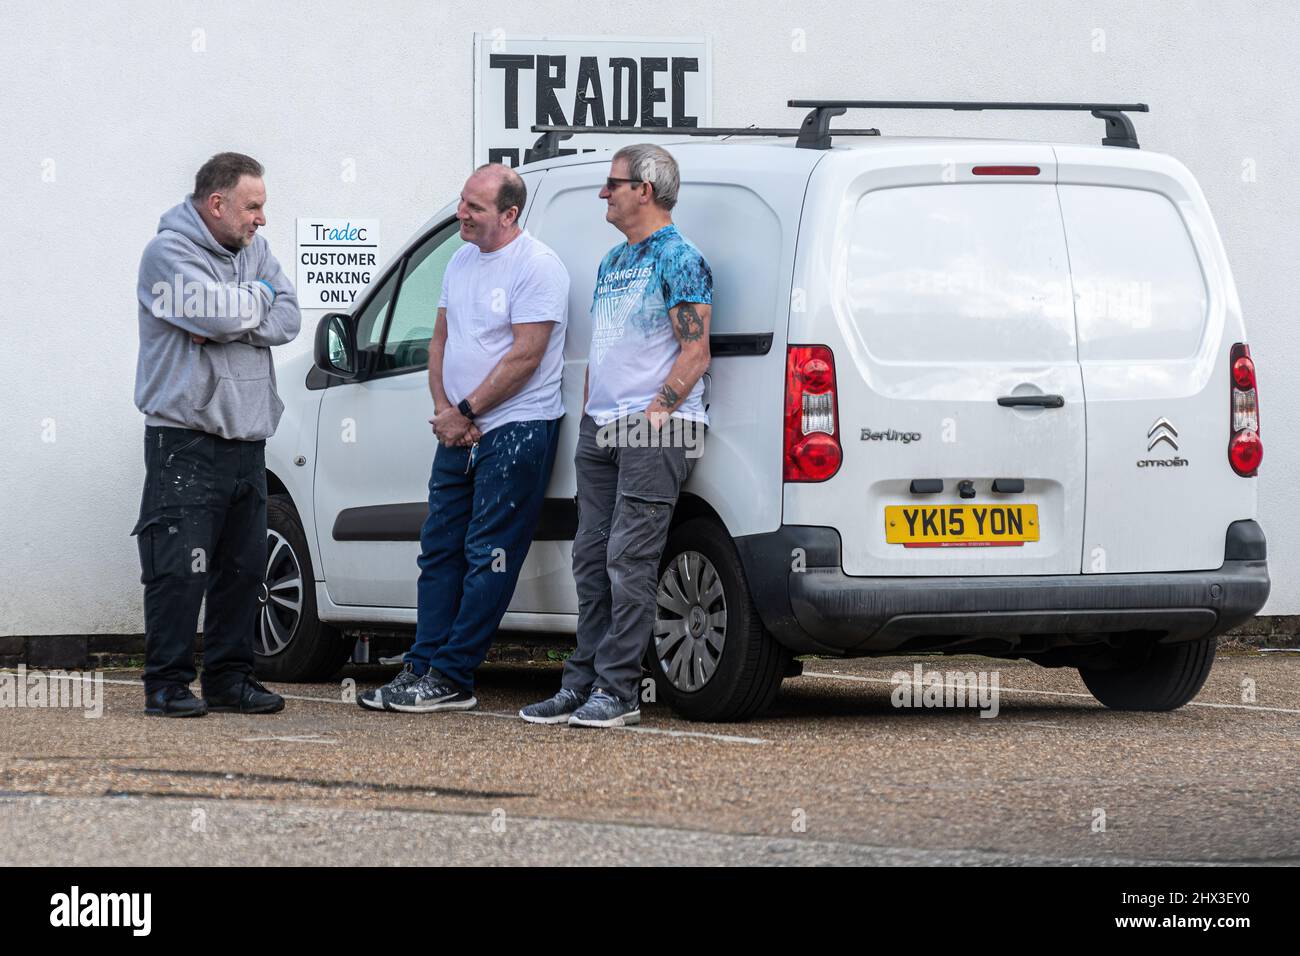 Three men workmen painters standing by a van chatting and joking in the car park of a painting and decorating business, UK everyday work life Stock Photo